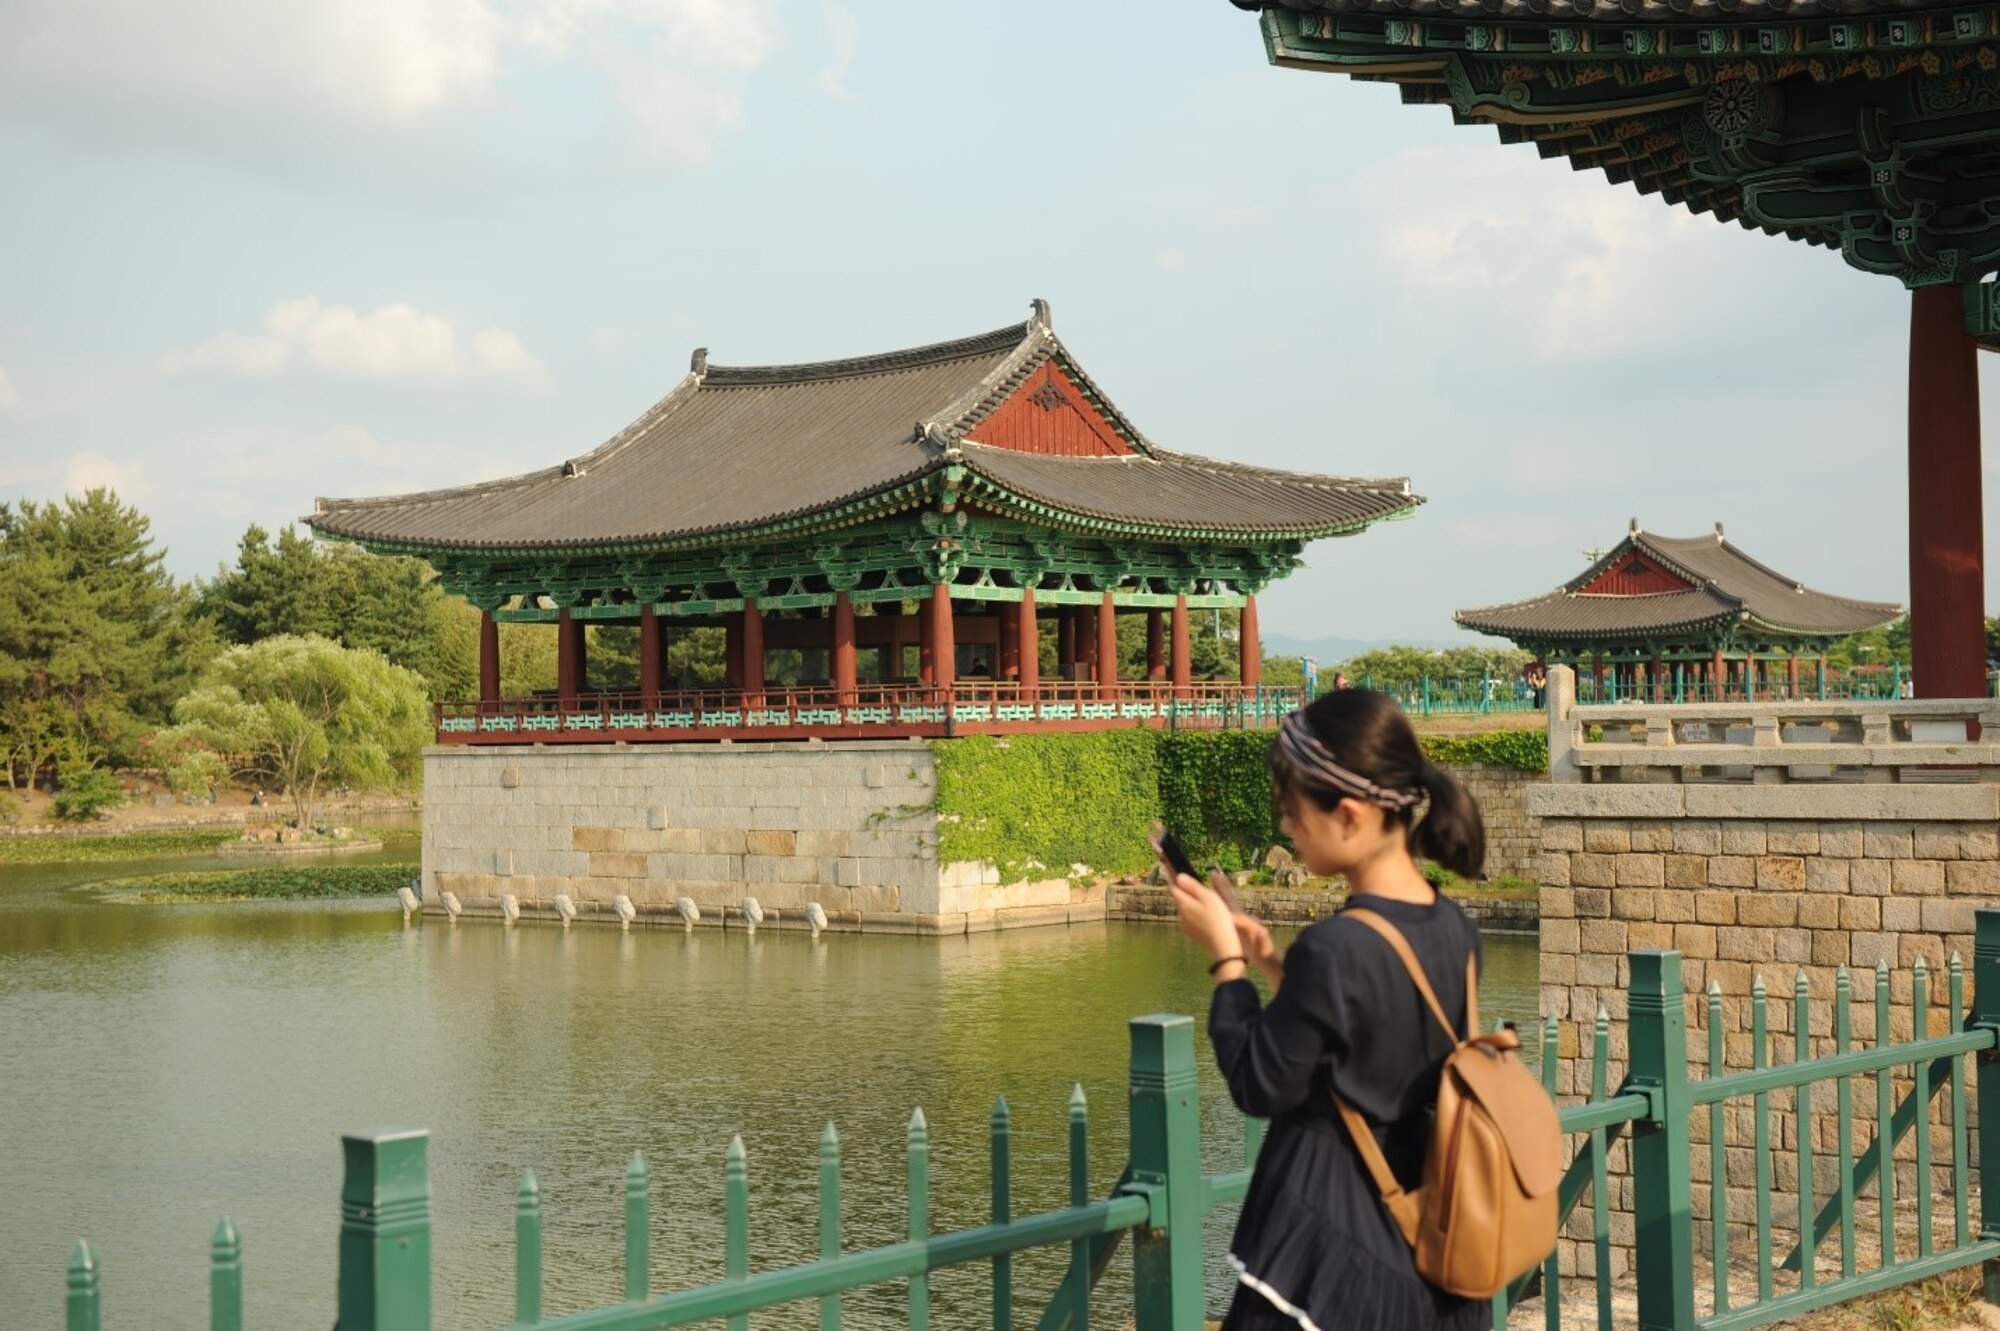 A visitor of the Donggung Palace and Wolji Pond takes a photo in Gyeongju, Republic of Korea, July 18, 2017. The Donggung Palace was built in 57 BCE and was a secondary palace, used for banquets and important national events. Nearly 100 United States Forces Korea members were invited by the Ministry of Patriots and Veterans Affairs to tour this location and other historic sites across the ROK as part of an initiative to give U.S. personnel a better understanding of Korean culture and patriotism. (U.S. Air Force photo by 1st Lt. Lauren Linscott/Released)